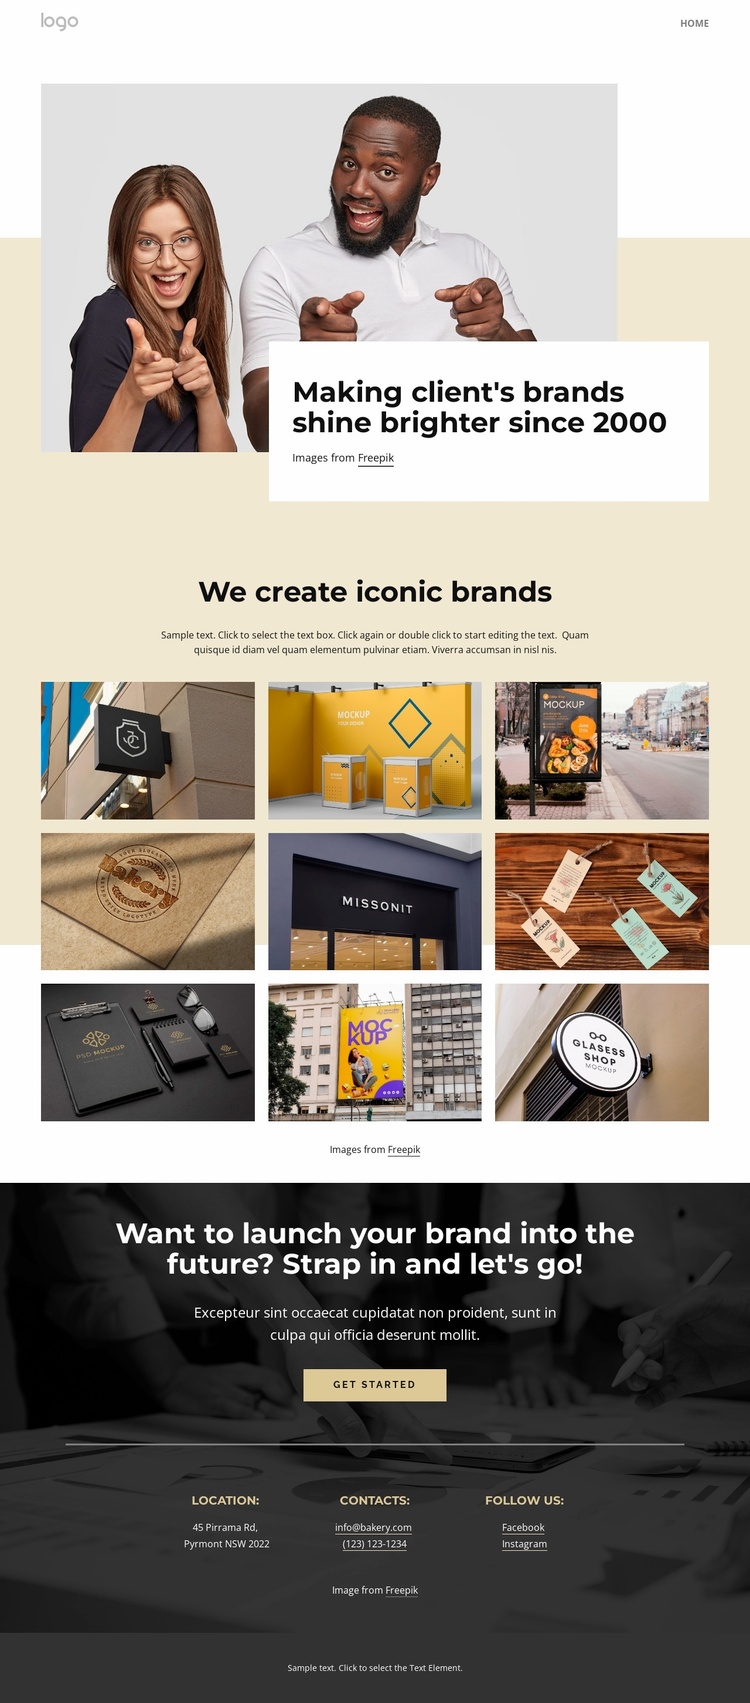 We create iconic brands Website Template